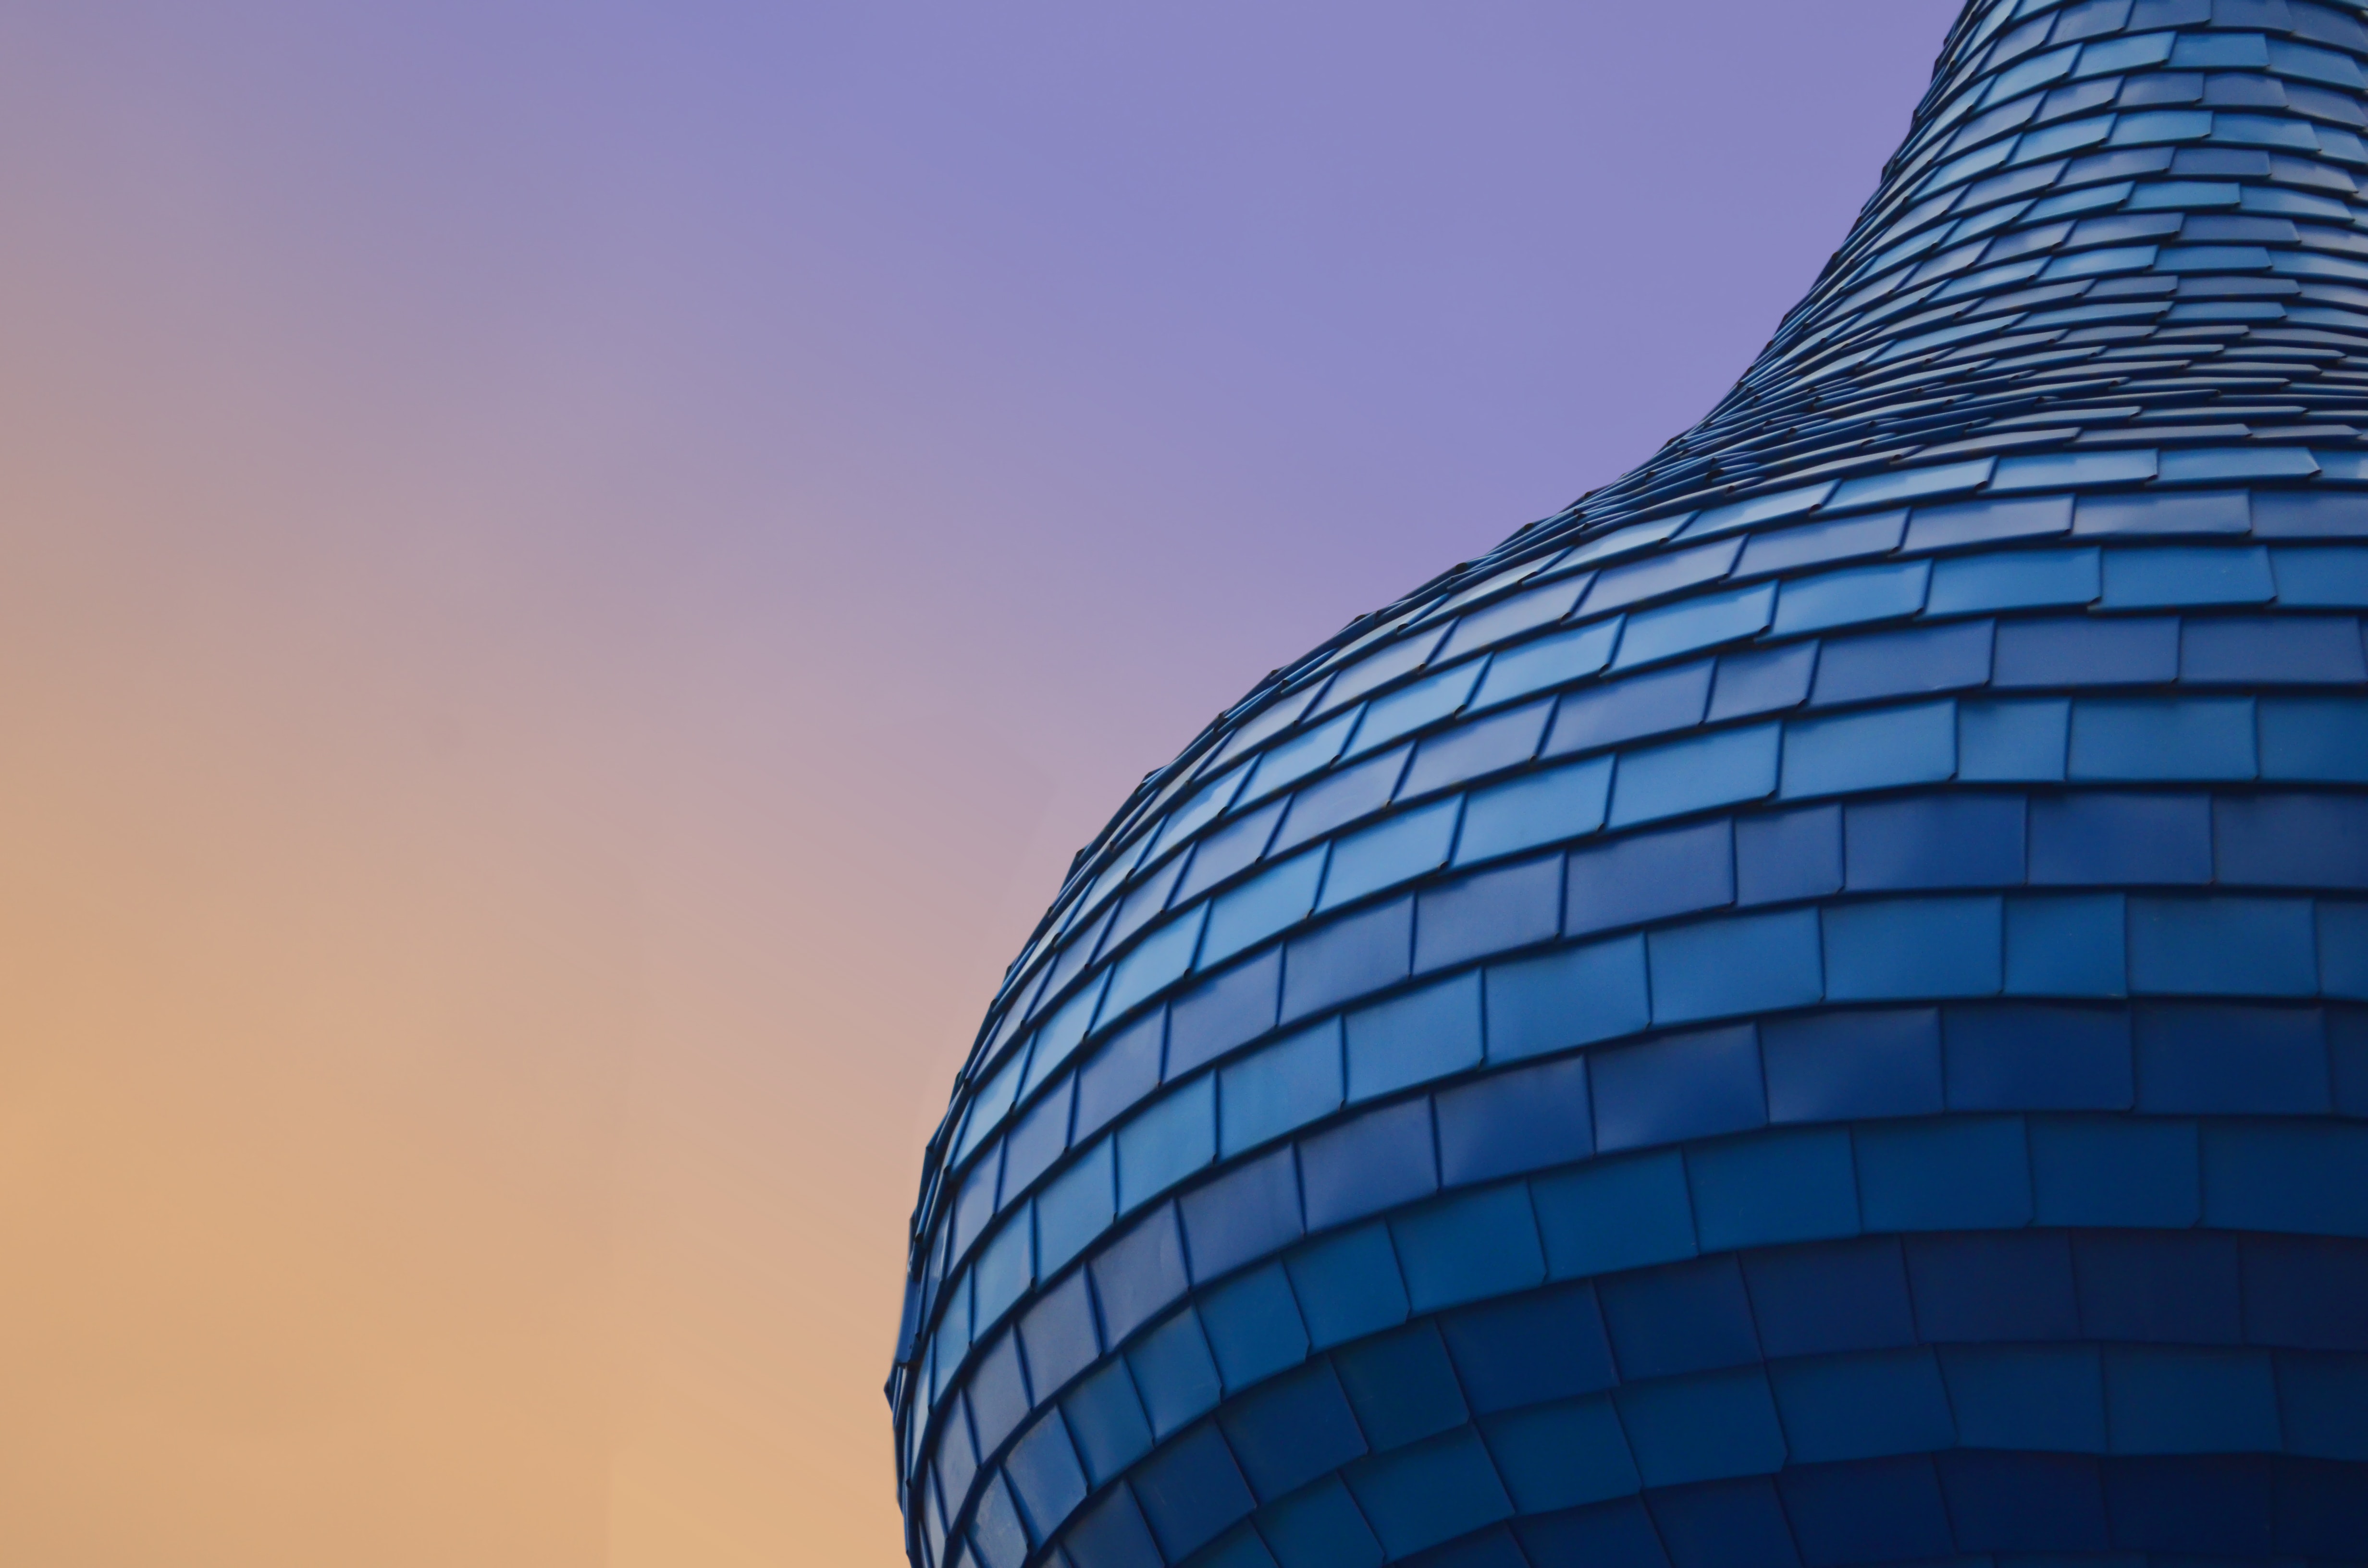 Close-up photo of a building during purple sunset